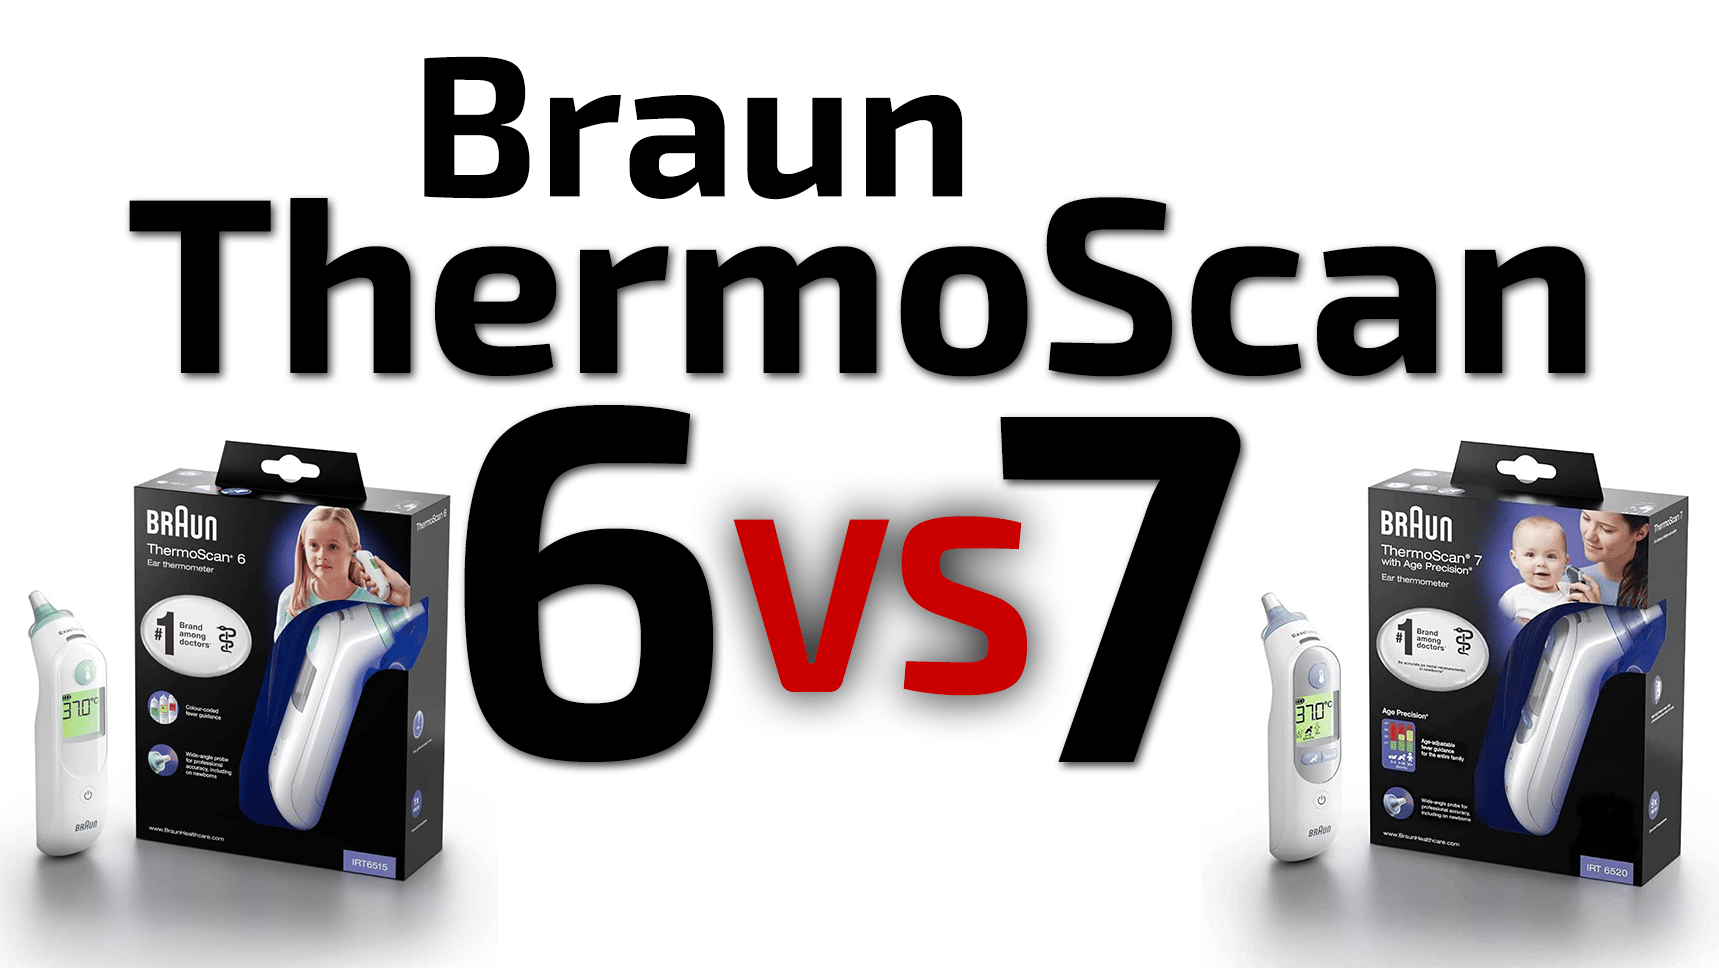 BRAUN - Ohrthermometer ThermoScan® 7+